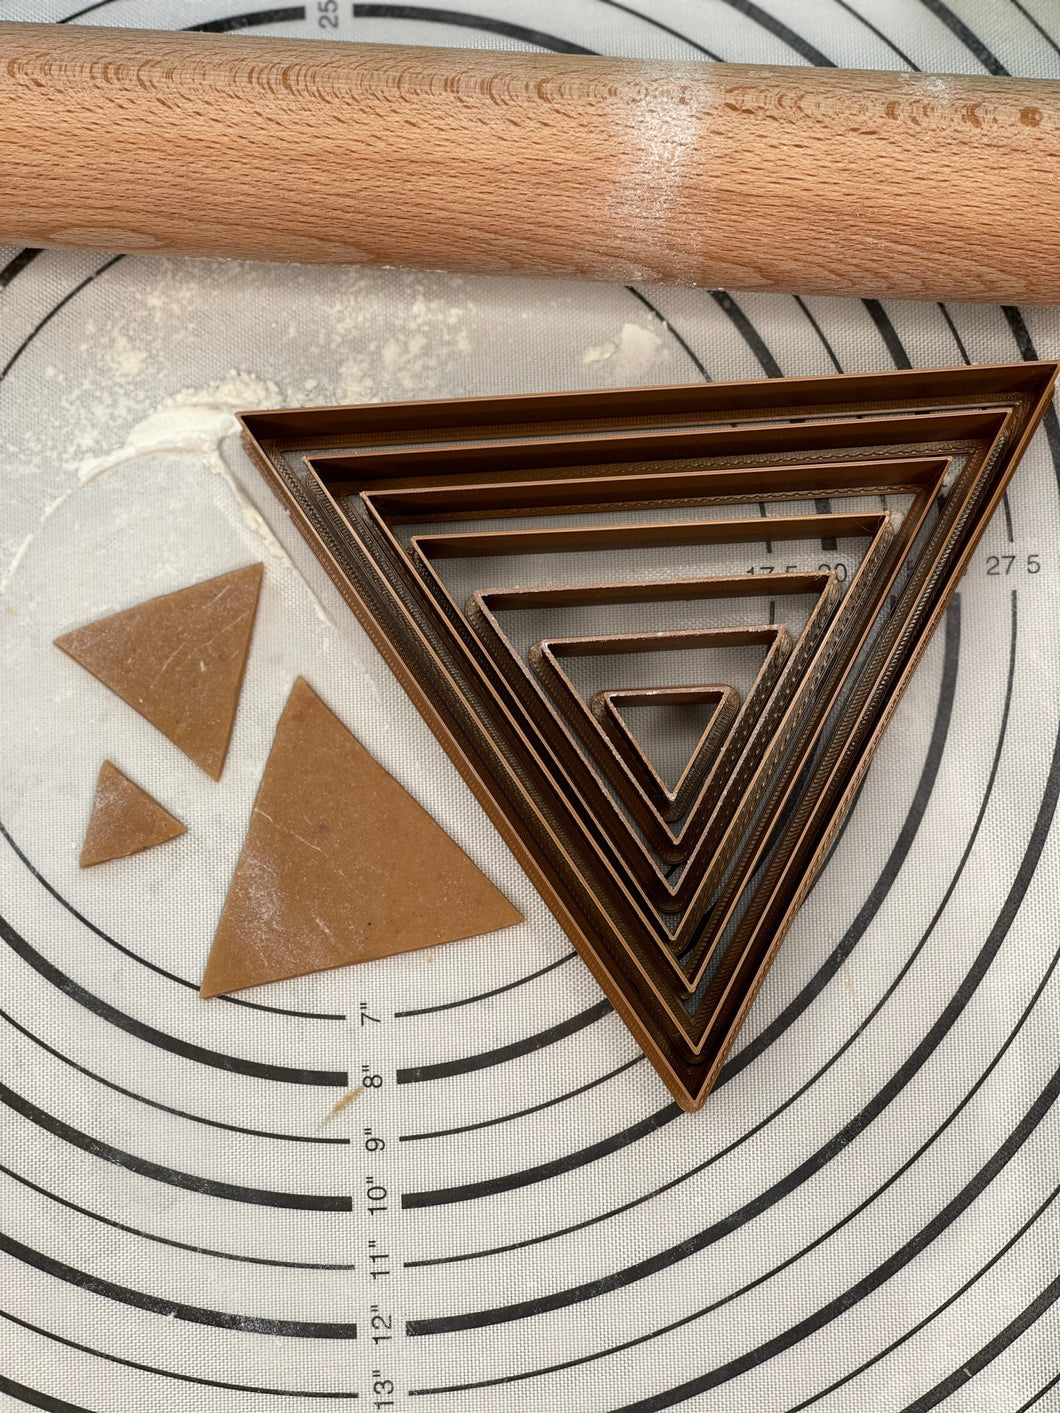 Premium Quality Set if 7 “Triangle” Cake, Biscuit & Cookie Cuttes Produced by 3D Kitchen Art